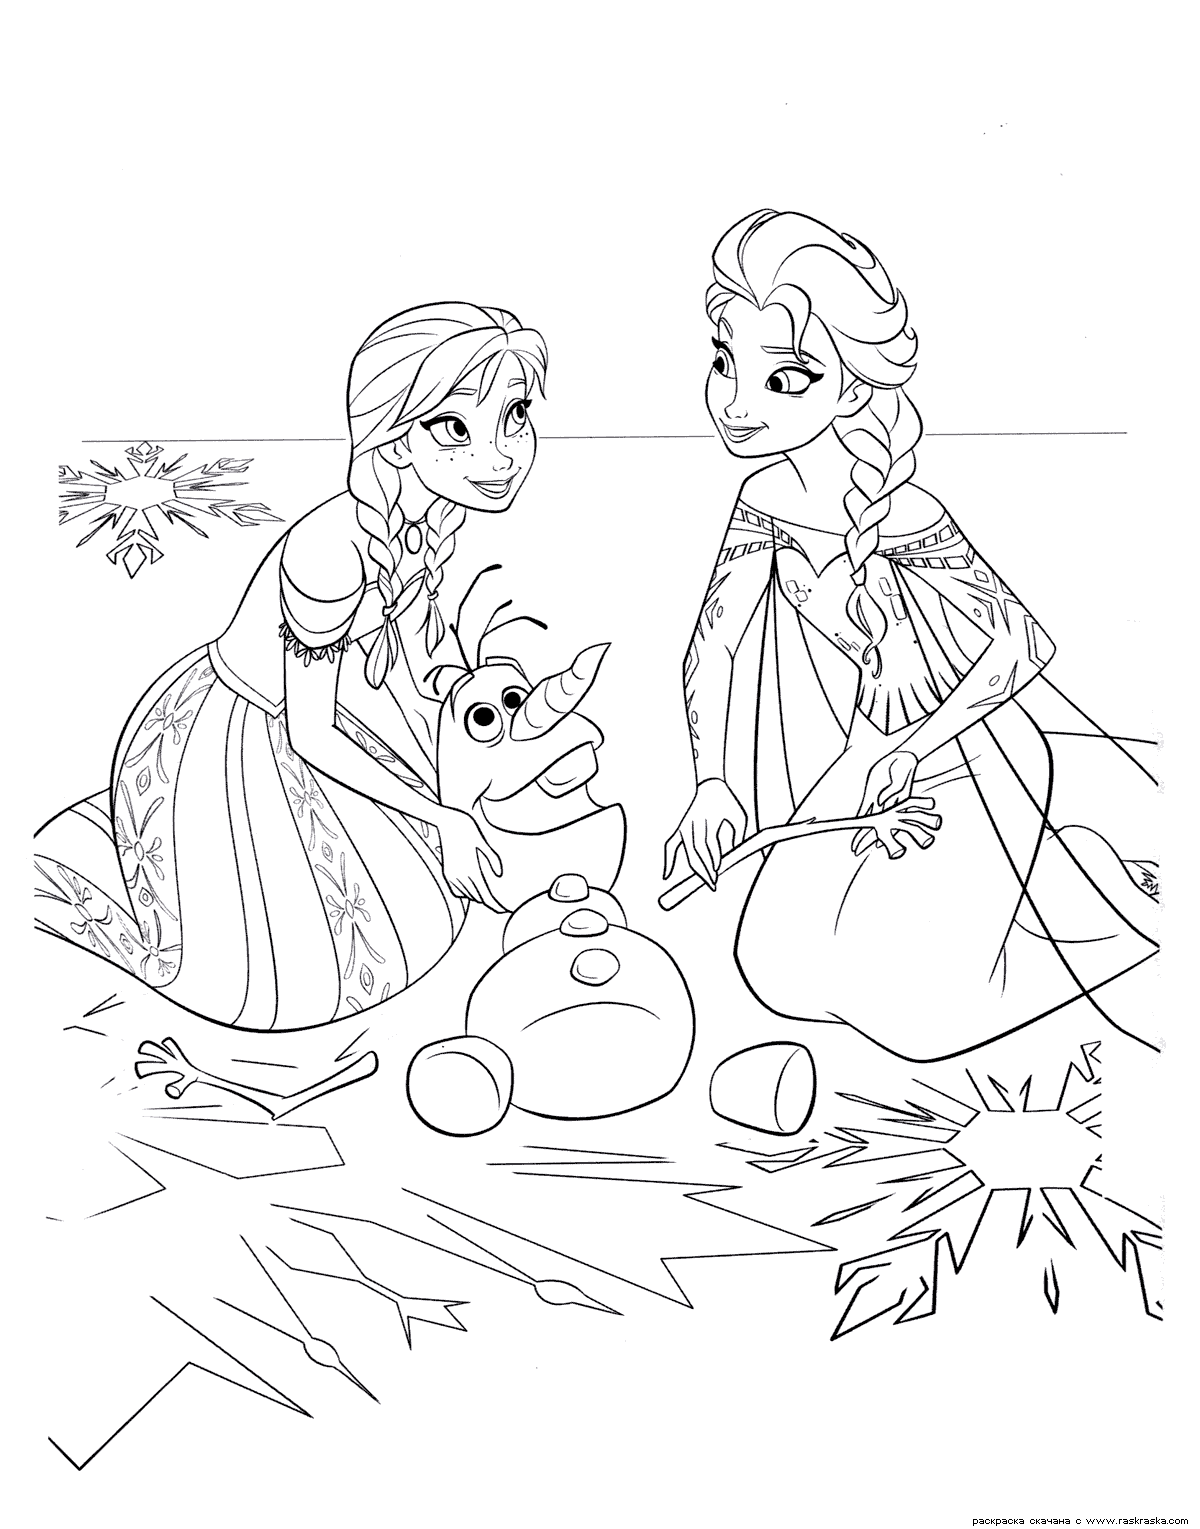 Frozen coloring pages, animated film characters Elsa, Anna, print for free